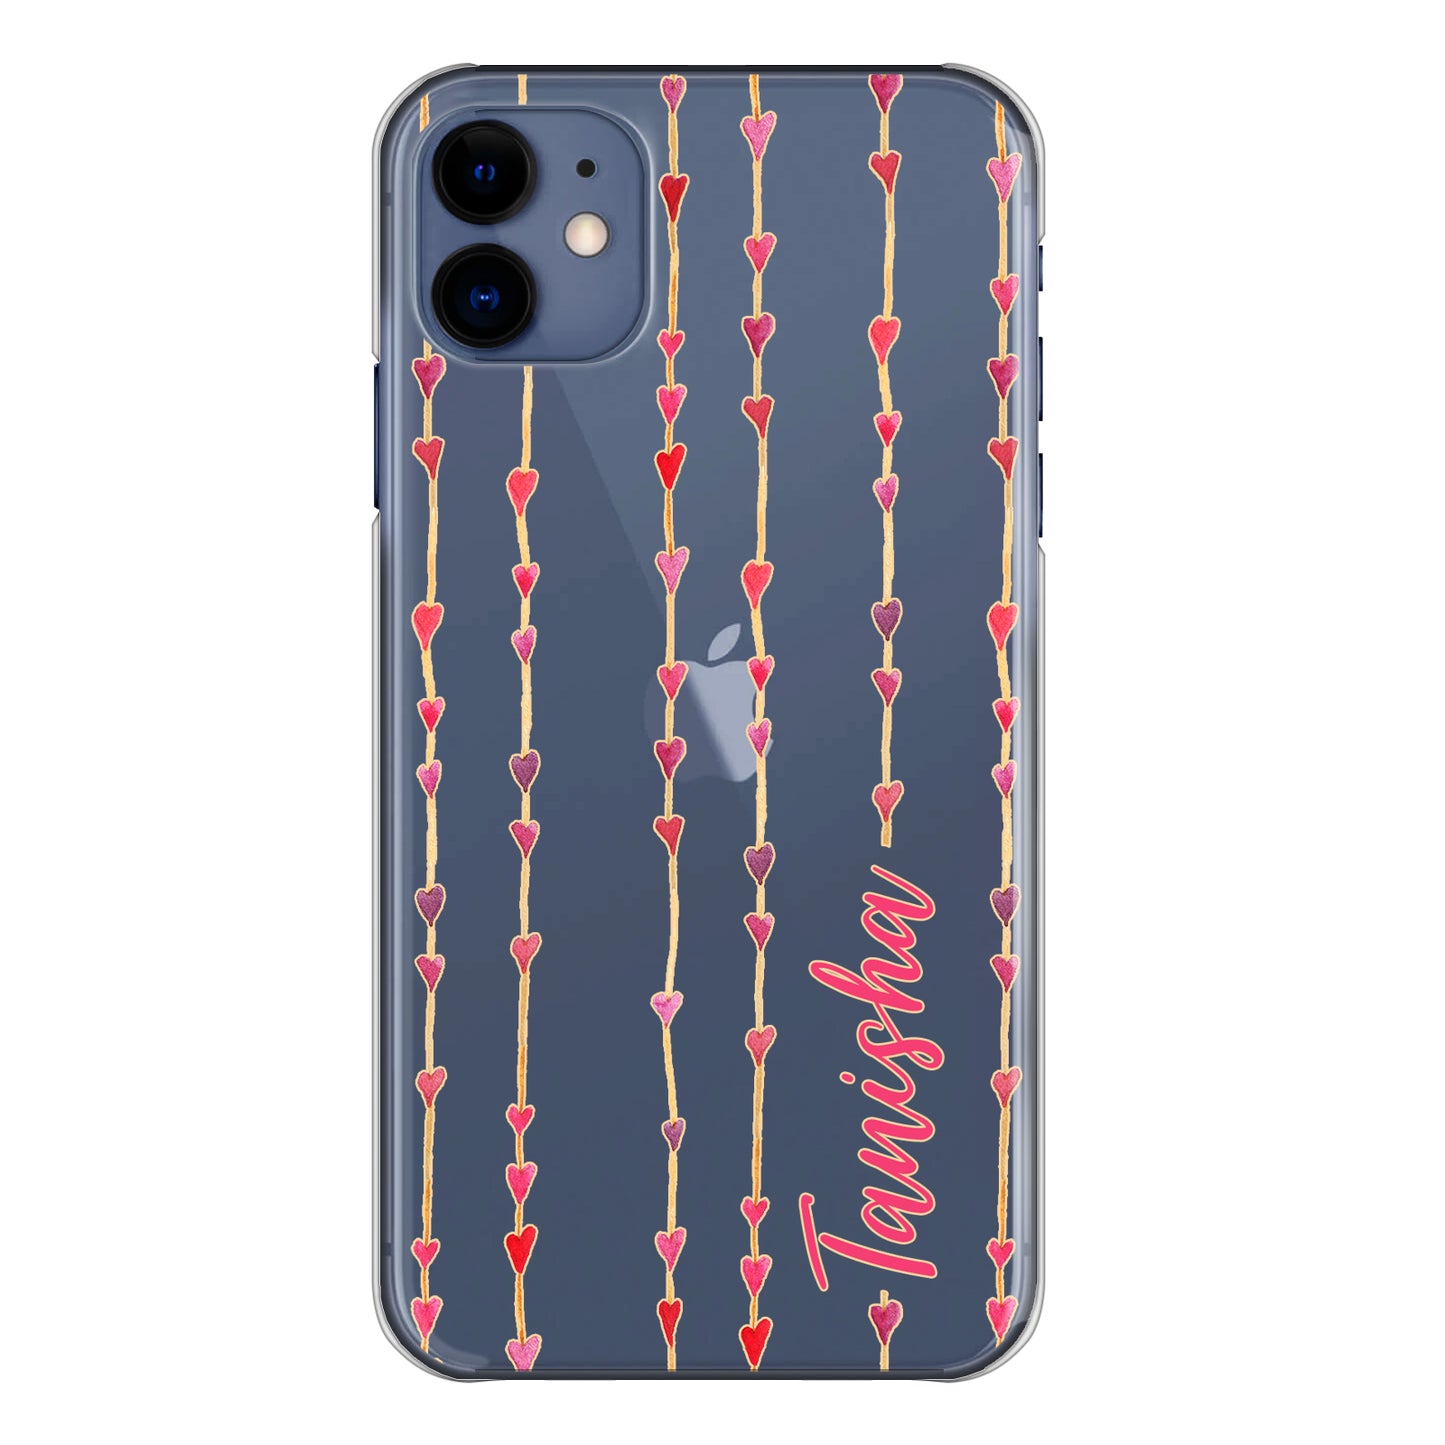 Personalised Motorola Phone Hard Case with Heart Strings and Stylish Pink Text